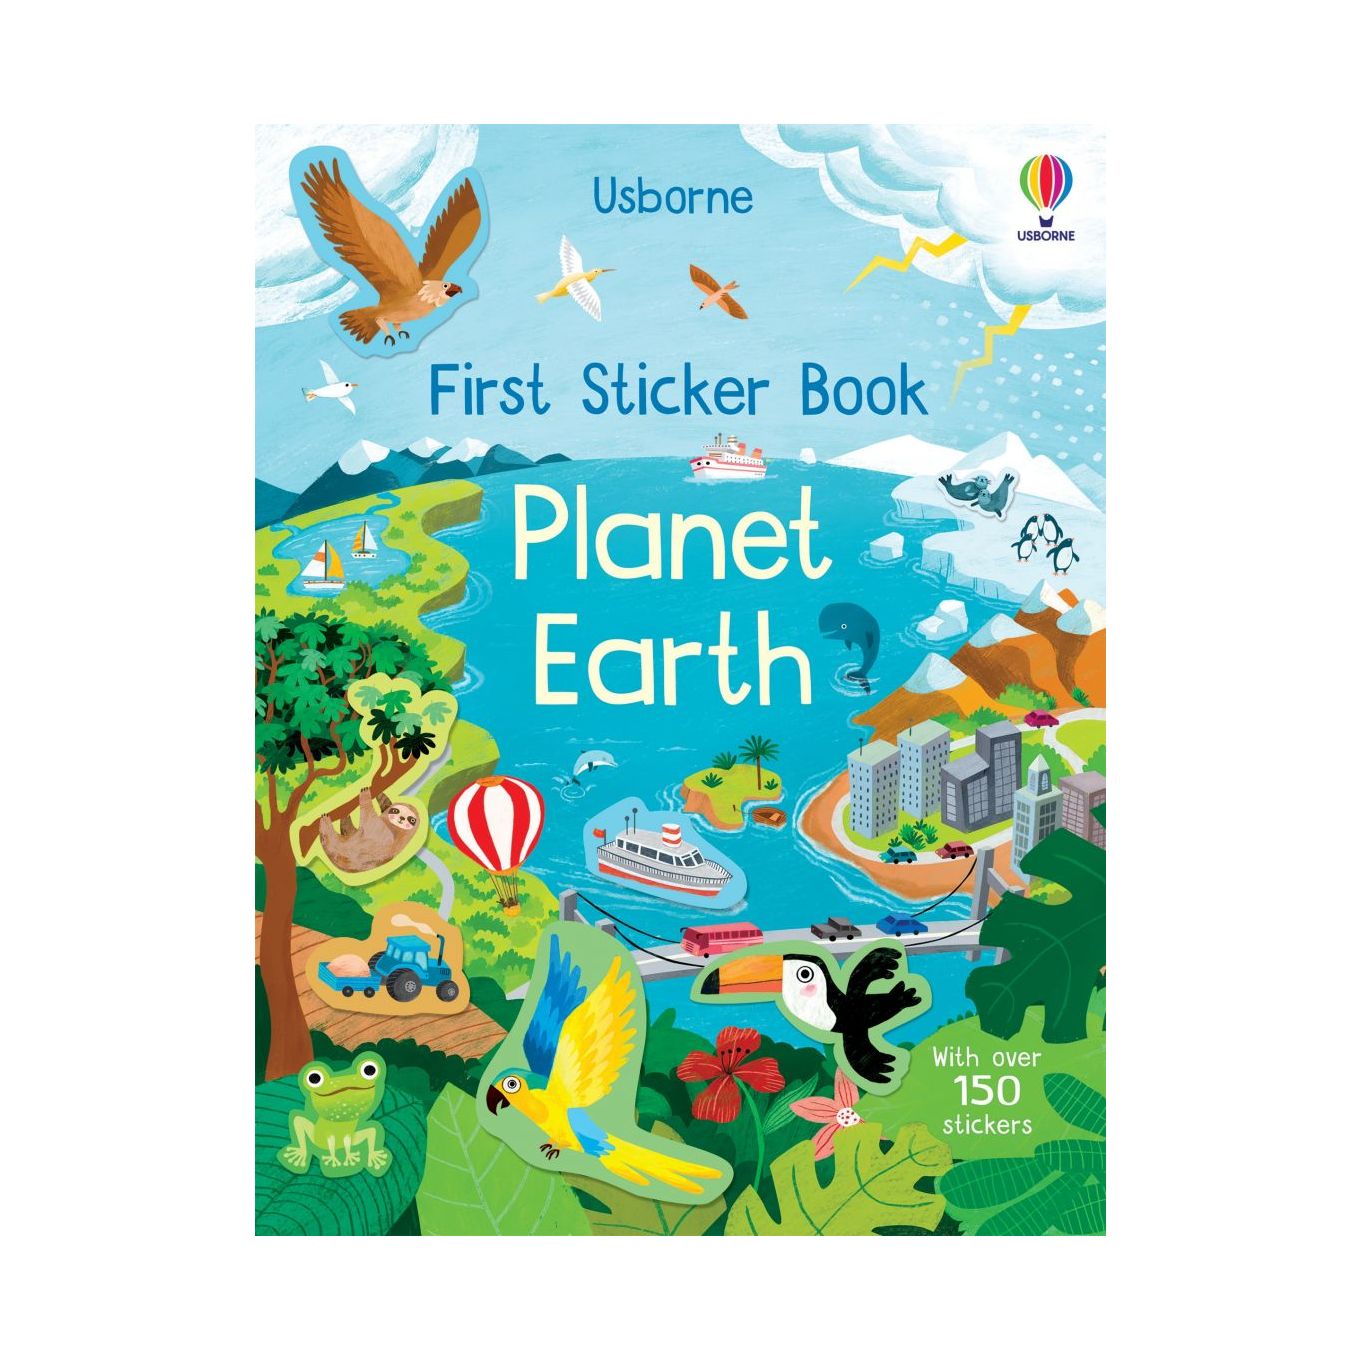 First Sticker Book: Planet Earth